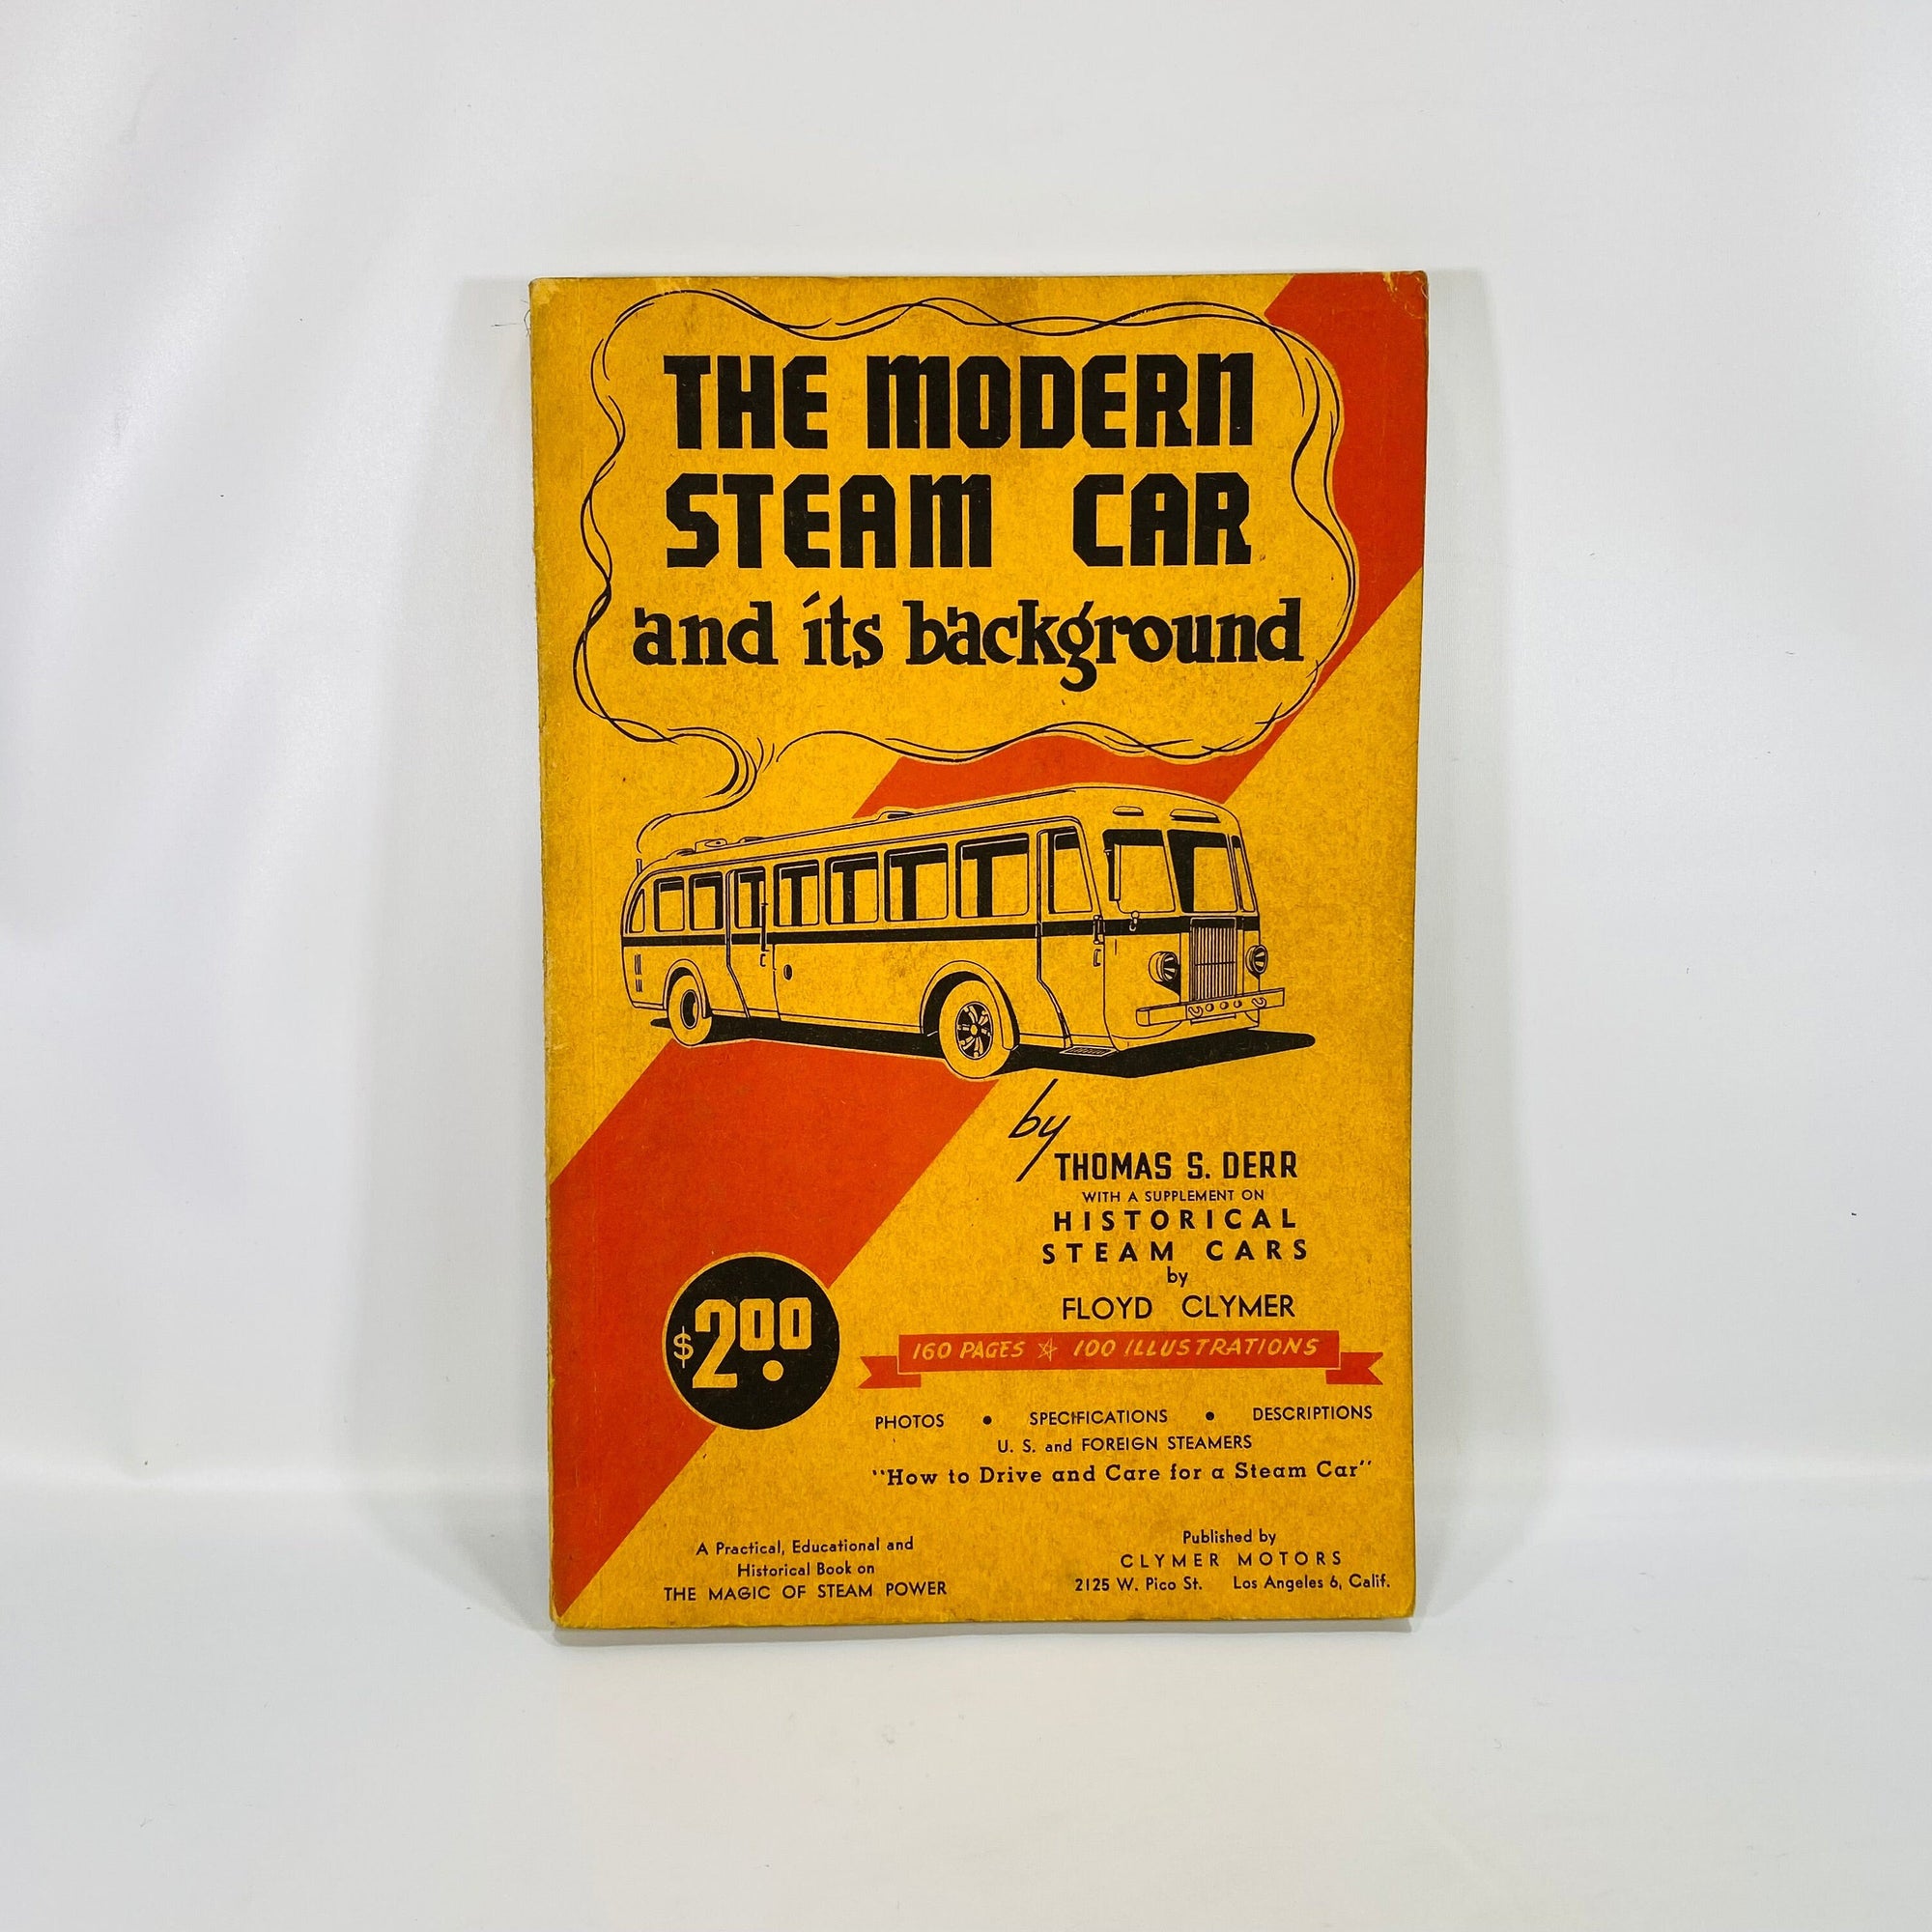 The Modern Steam Car and its Background by Thomas S. Derr 1934  Clymer Motors